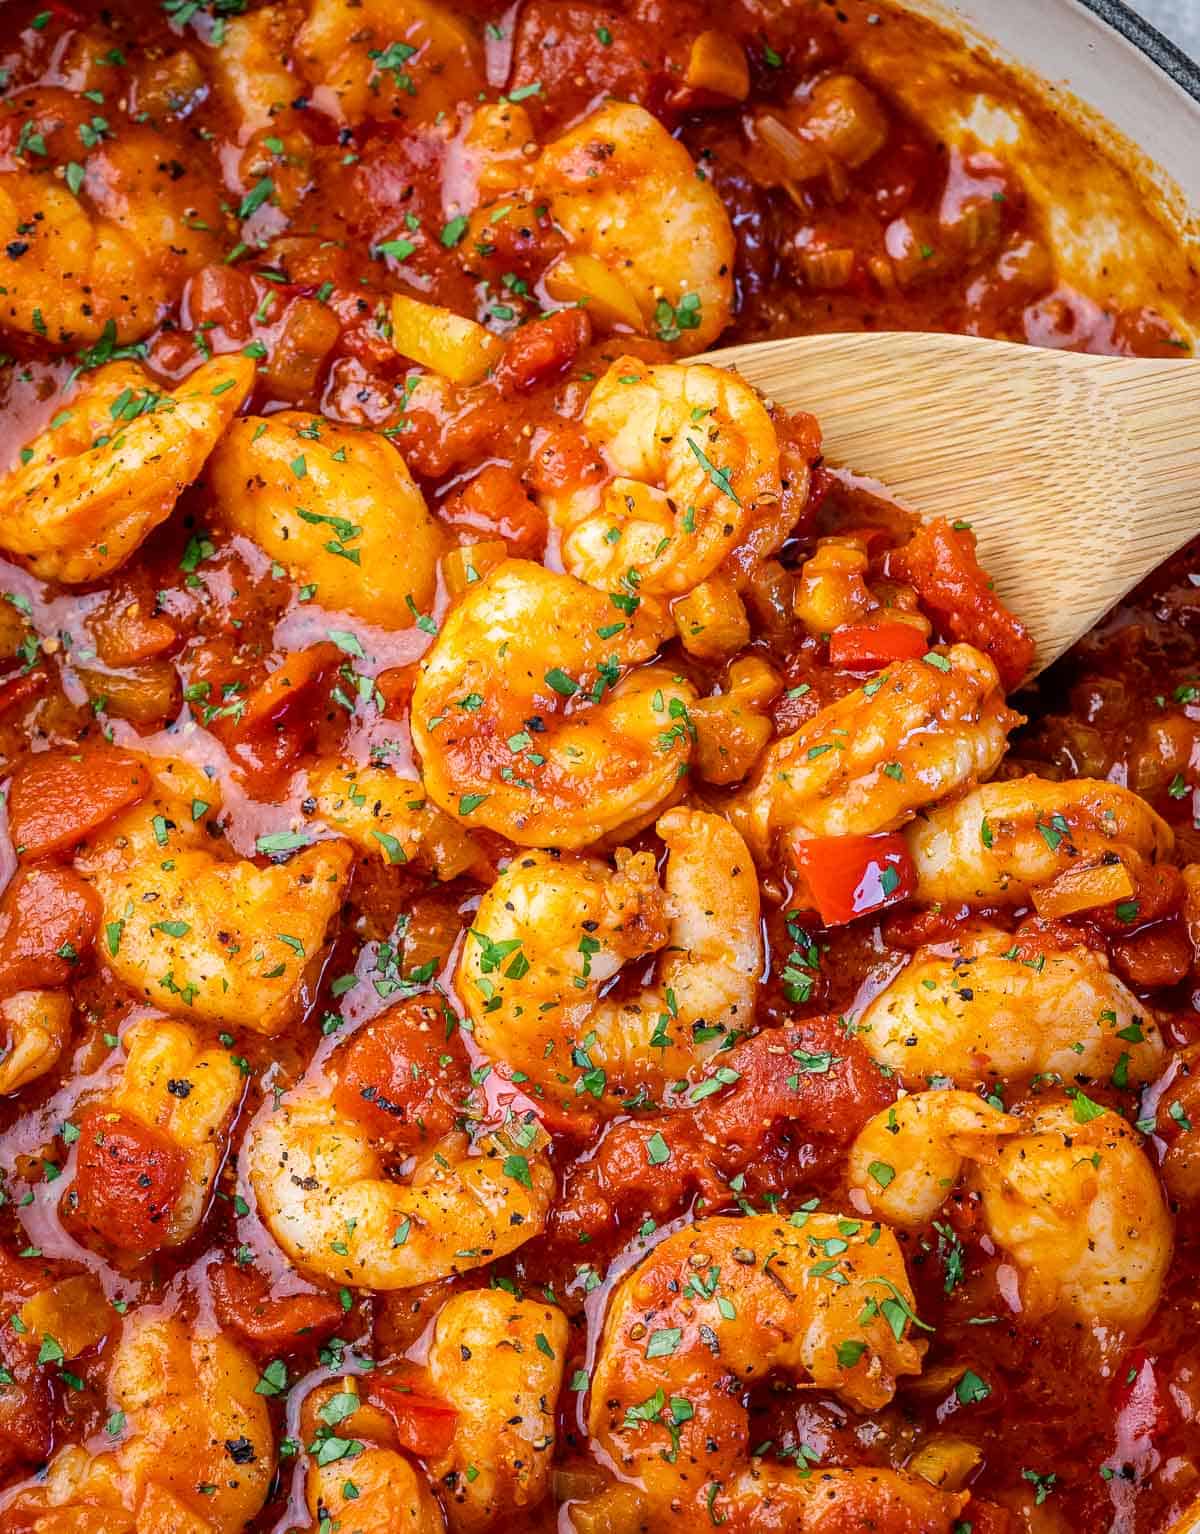 Using a wooden spoon to serve shrimp in a tomato based sauce.